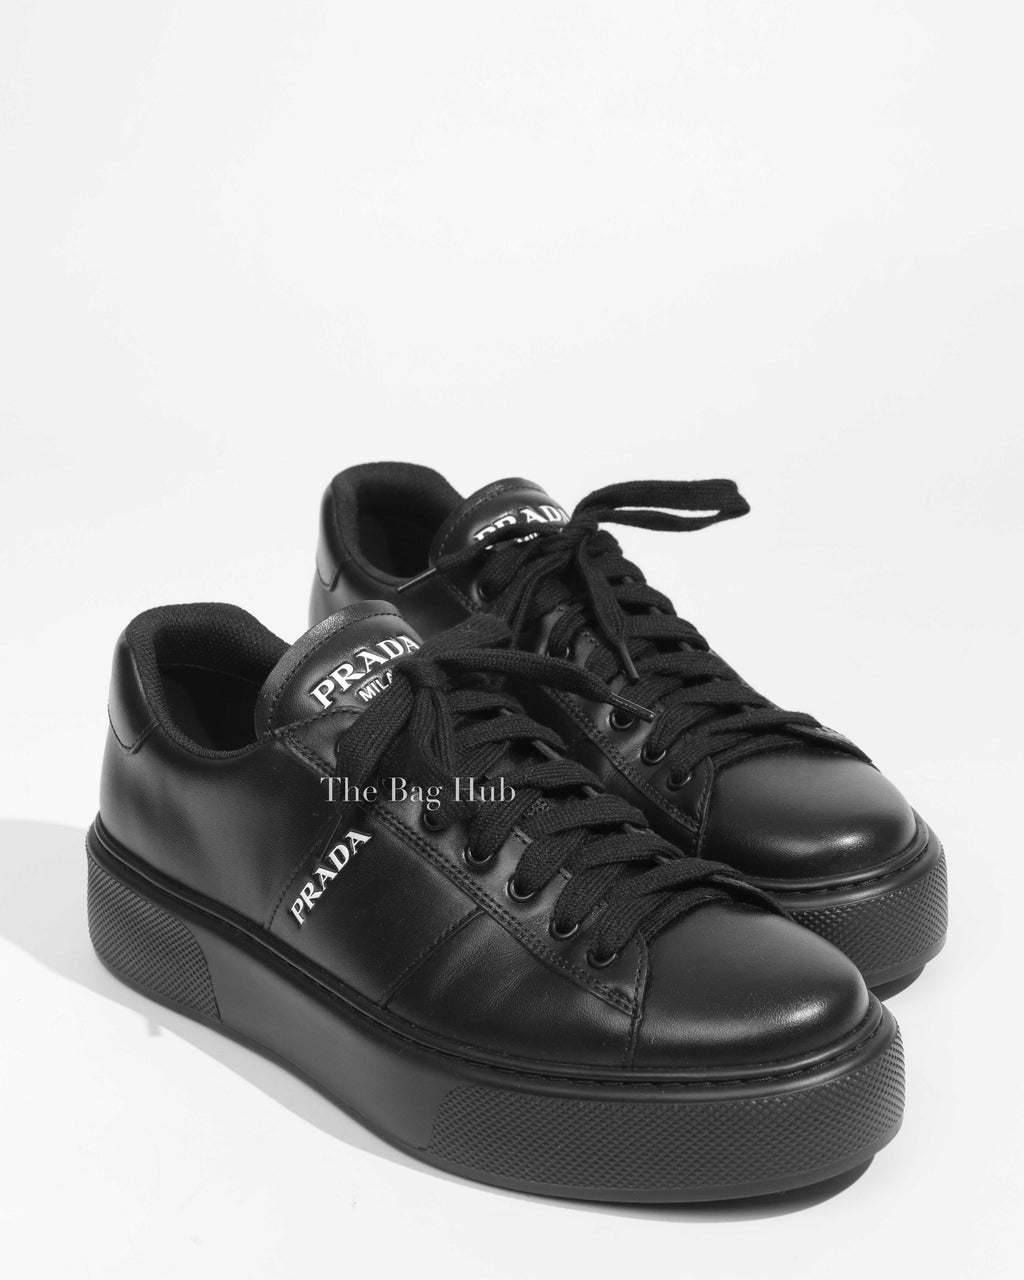 Prada Black Leather Lace Up Men's Sneakers Size 11-1